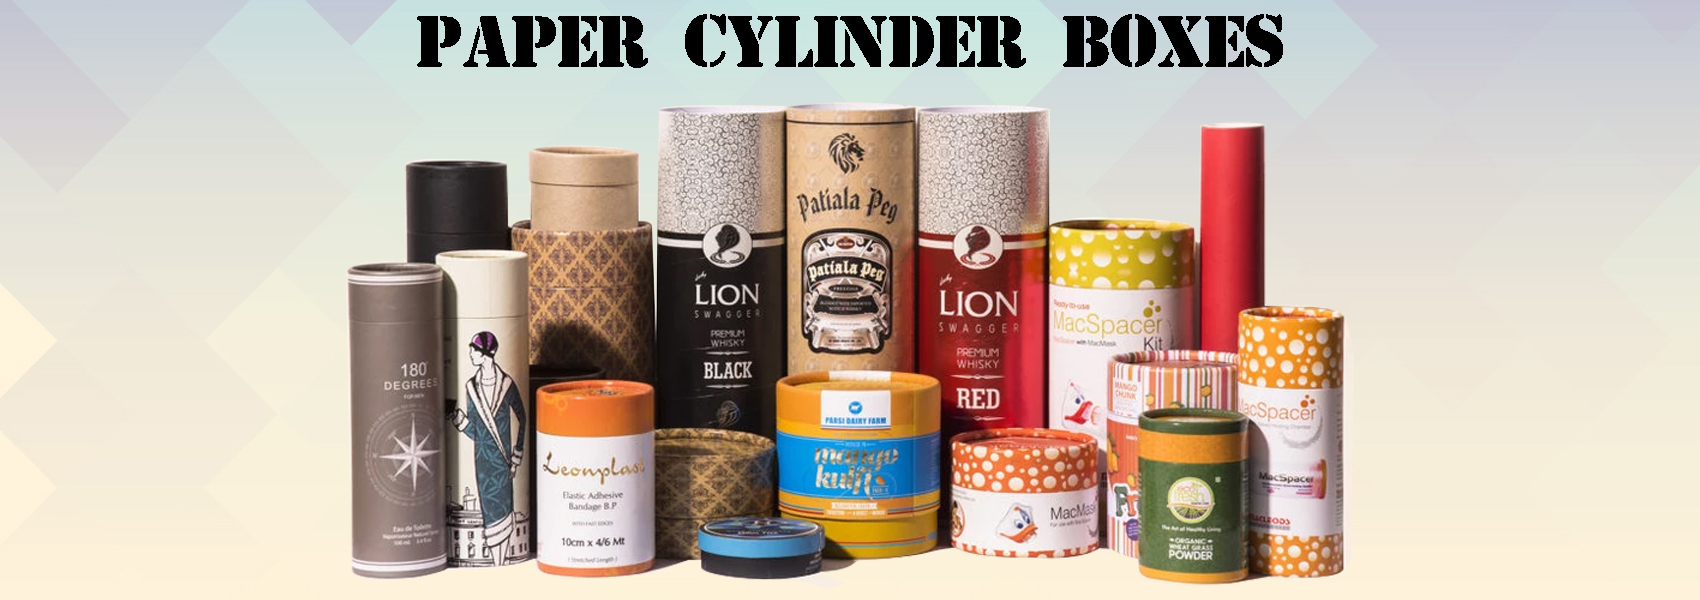 Paper Cylinder Boxes, Paper Rounder Boxes, Paper Tube Boxes